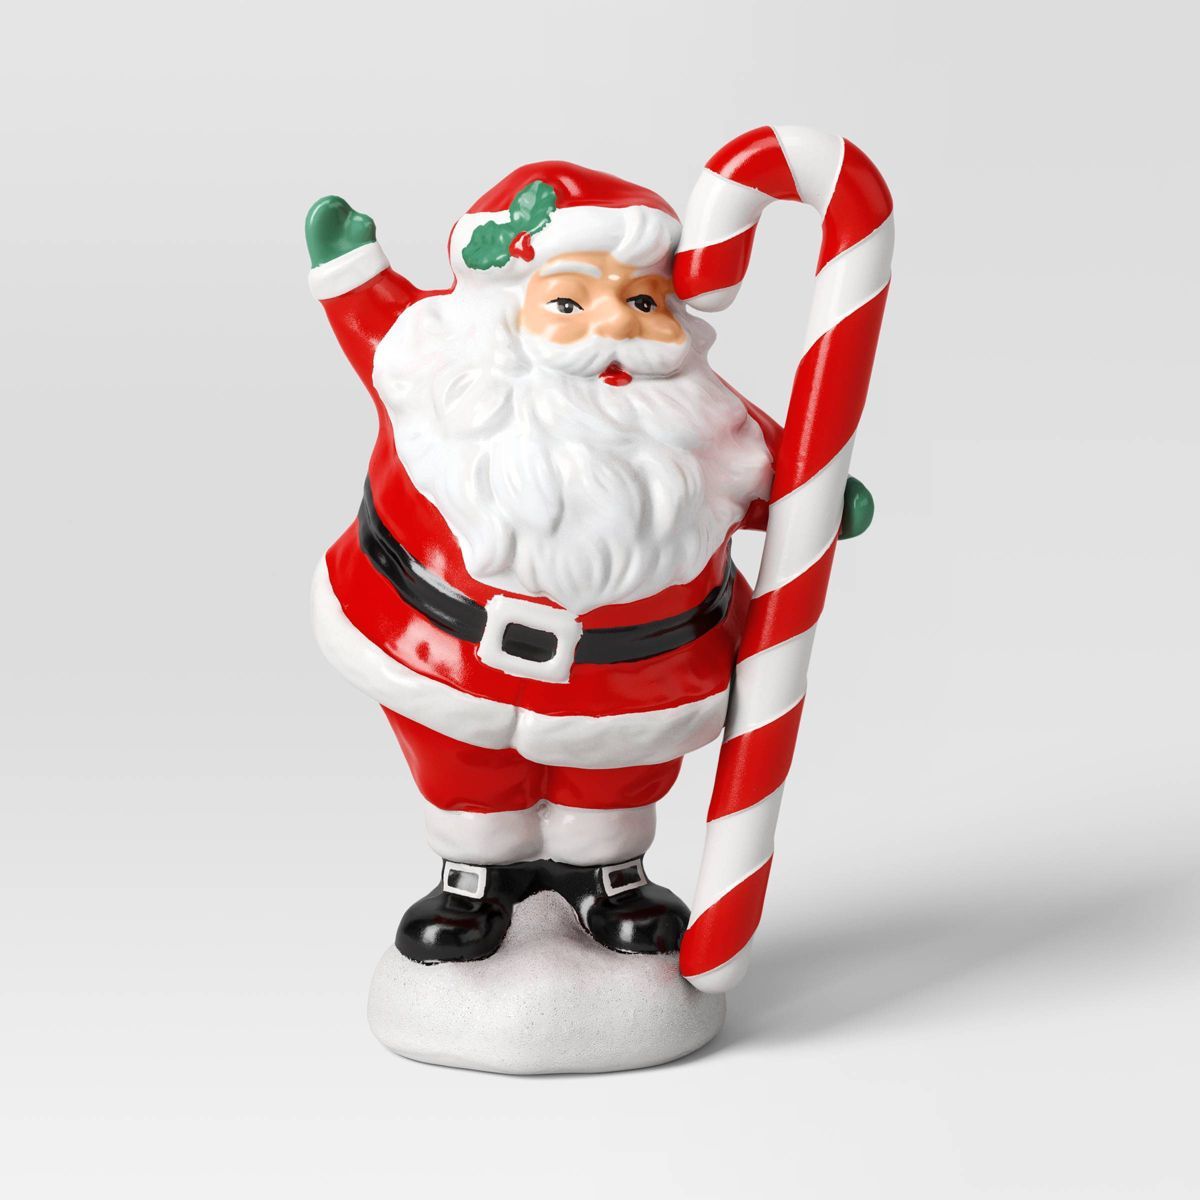 12" Battery Operated Lit Santa Christmas Figurine with Candy Cane - Wondershop™ | Target